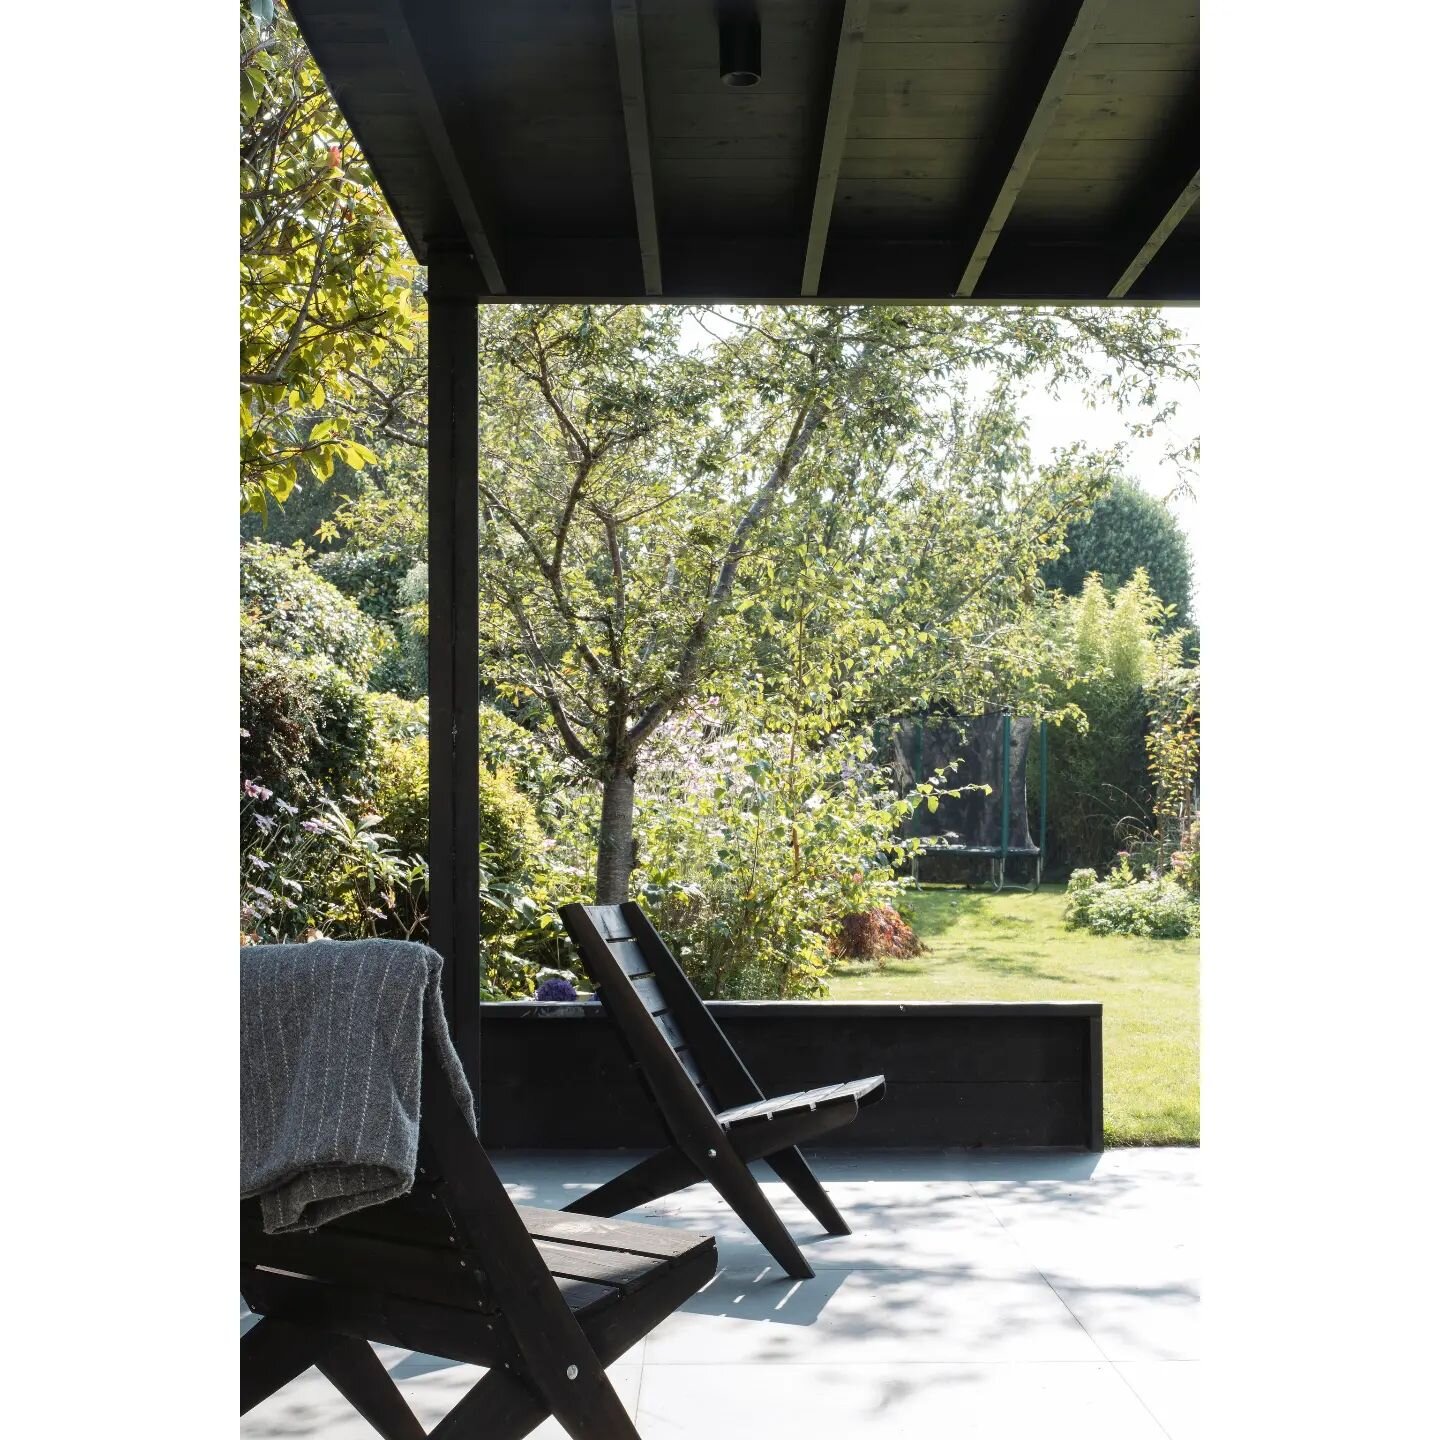 Culligan Architects created an extension to the rear&nbsp;of a 1930s house in Dalkey Co. Dublin,&nbsp;with a covered outdoor space, creating an outdoor room for use by the family. The extension is a place of calm, this was achieved through clean line